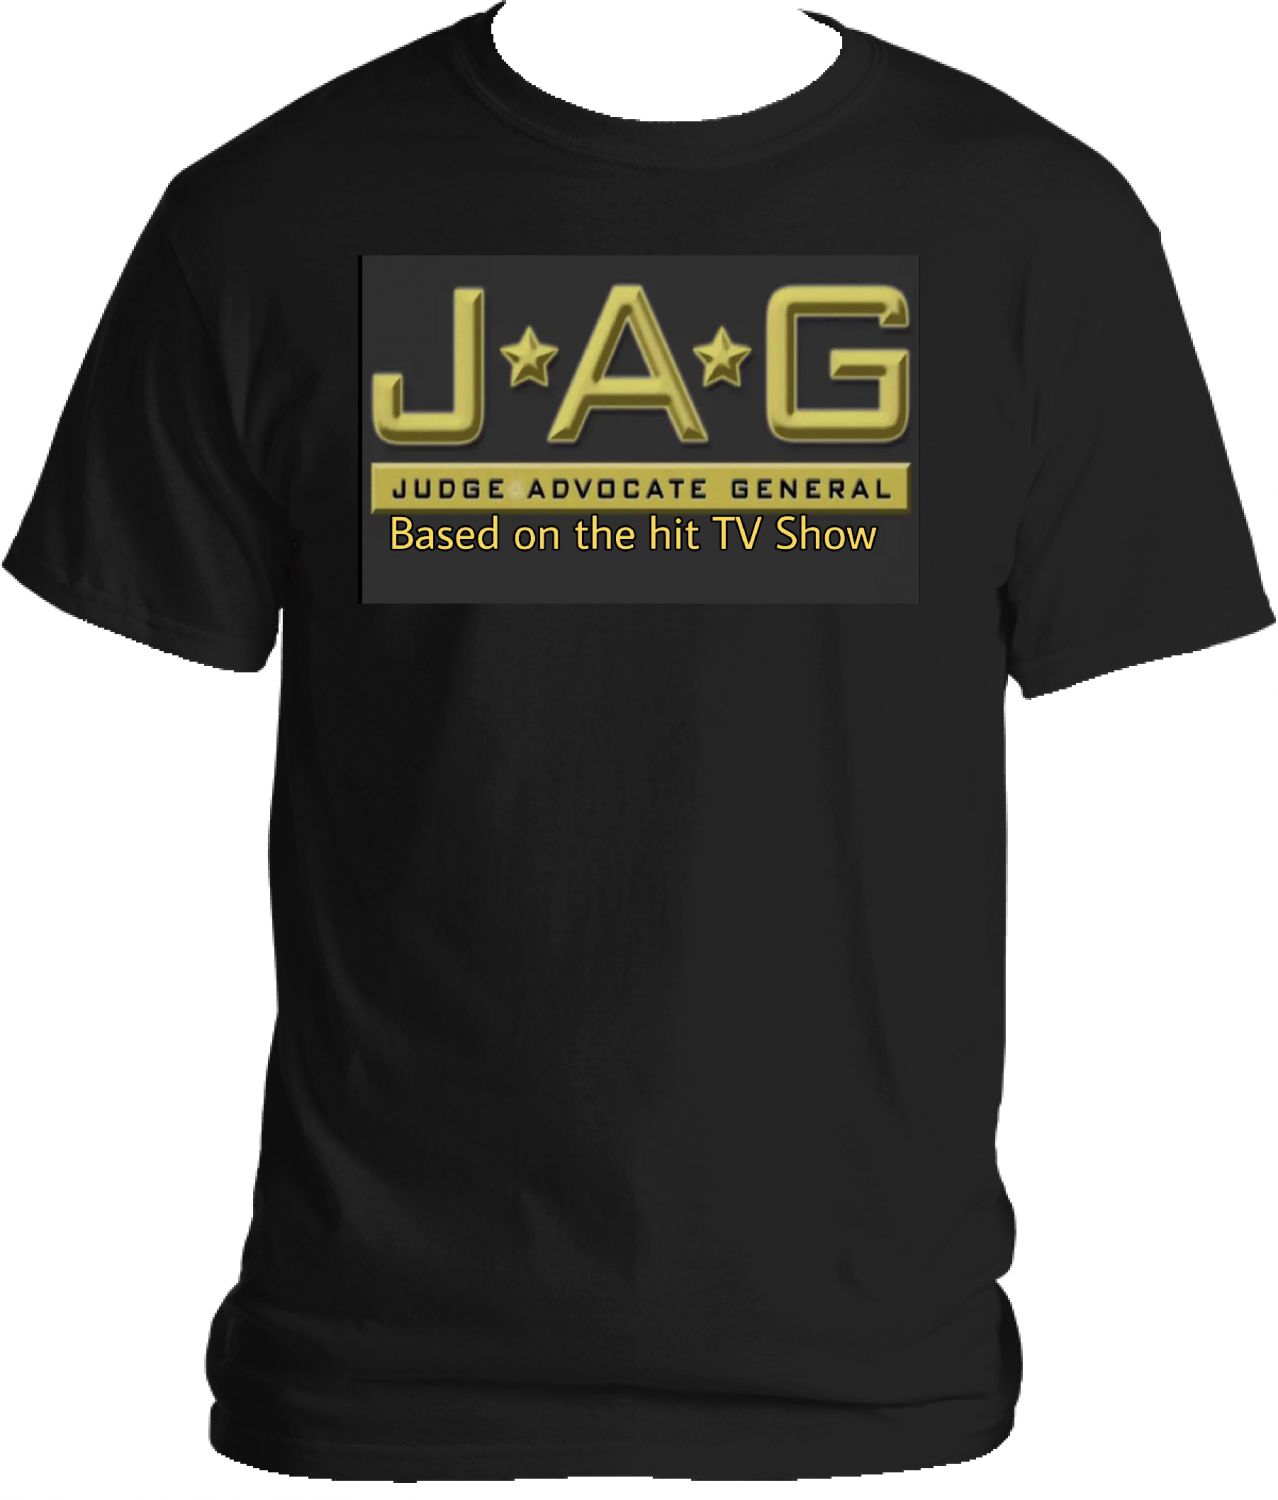 JAG based on the tv show